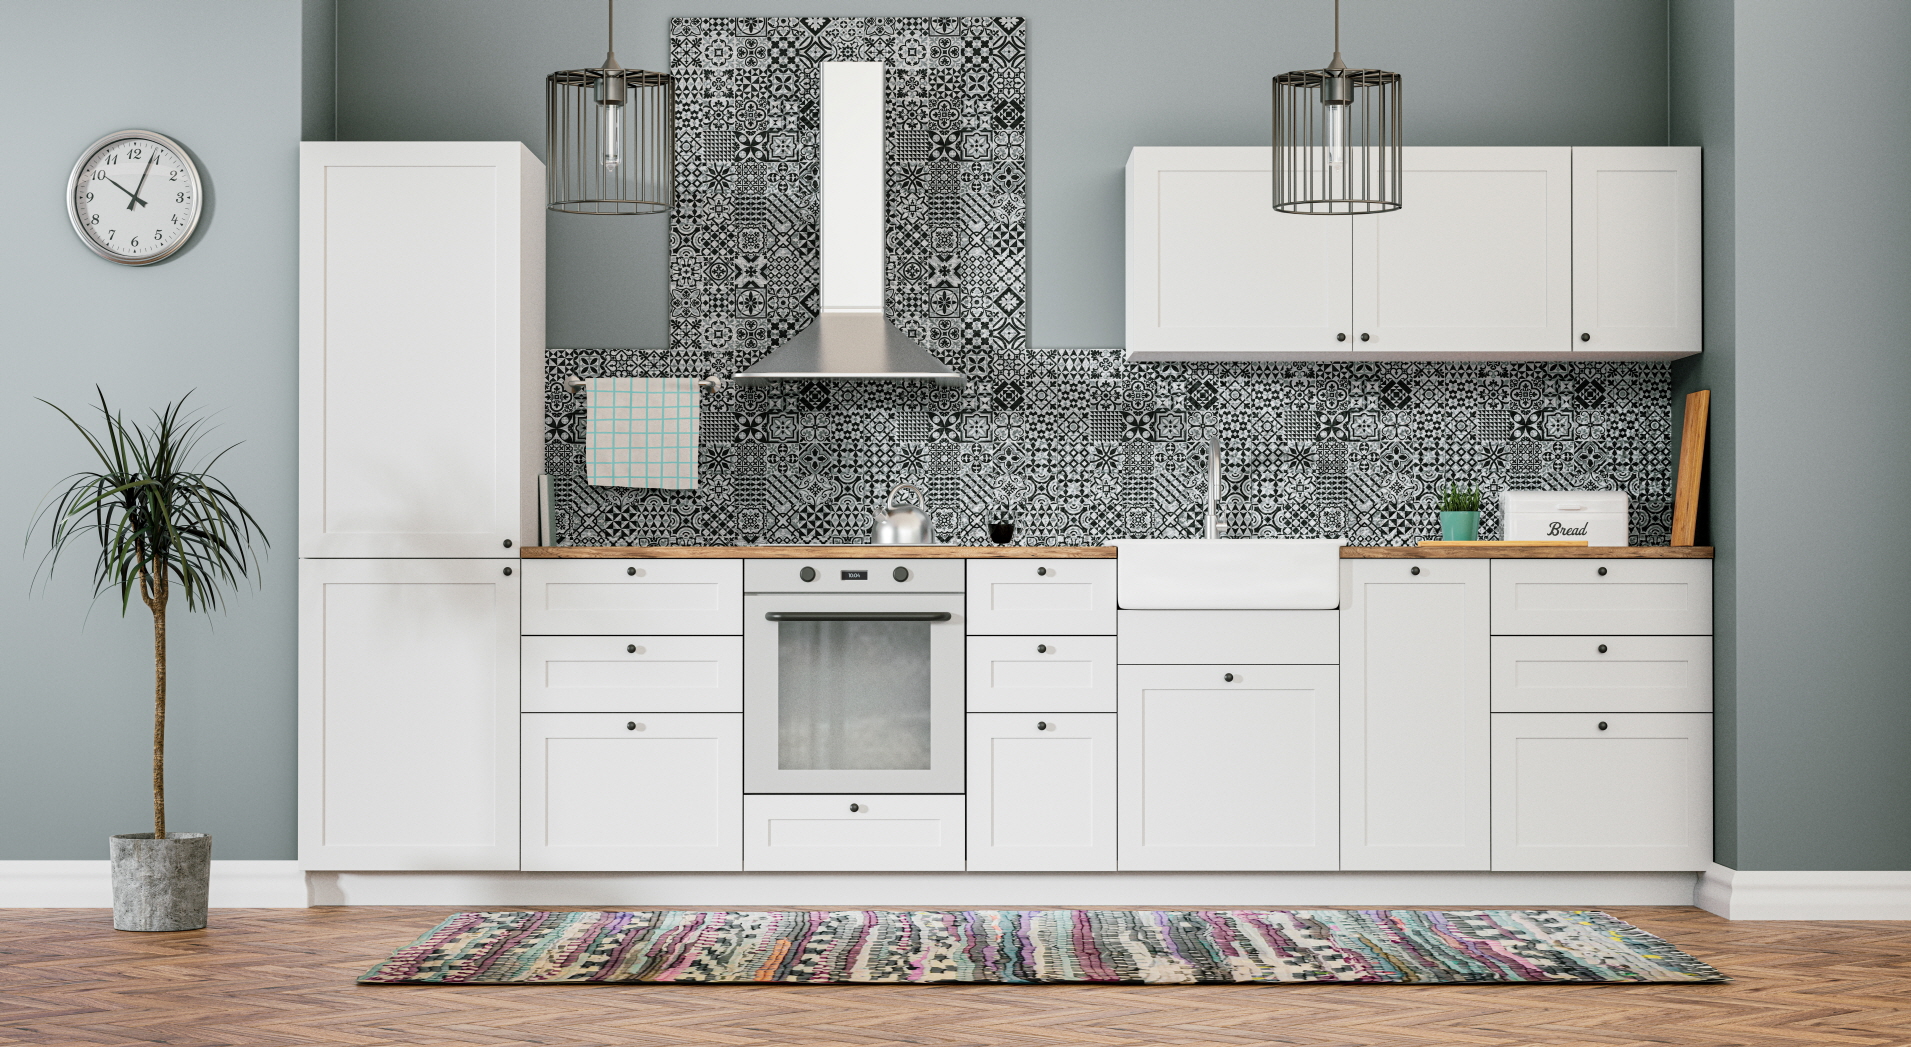 Create a stylish budget kitchen by mixing bold and neutral elements.